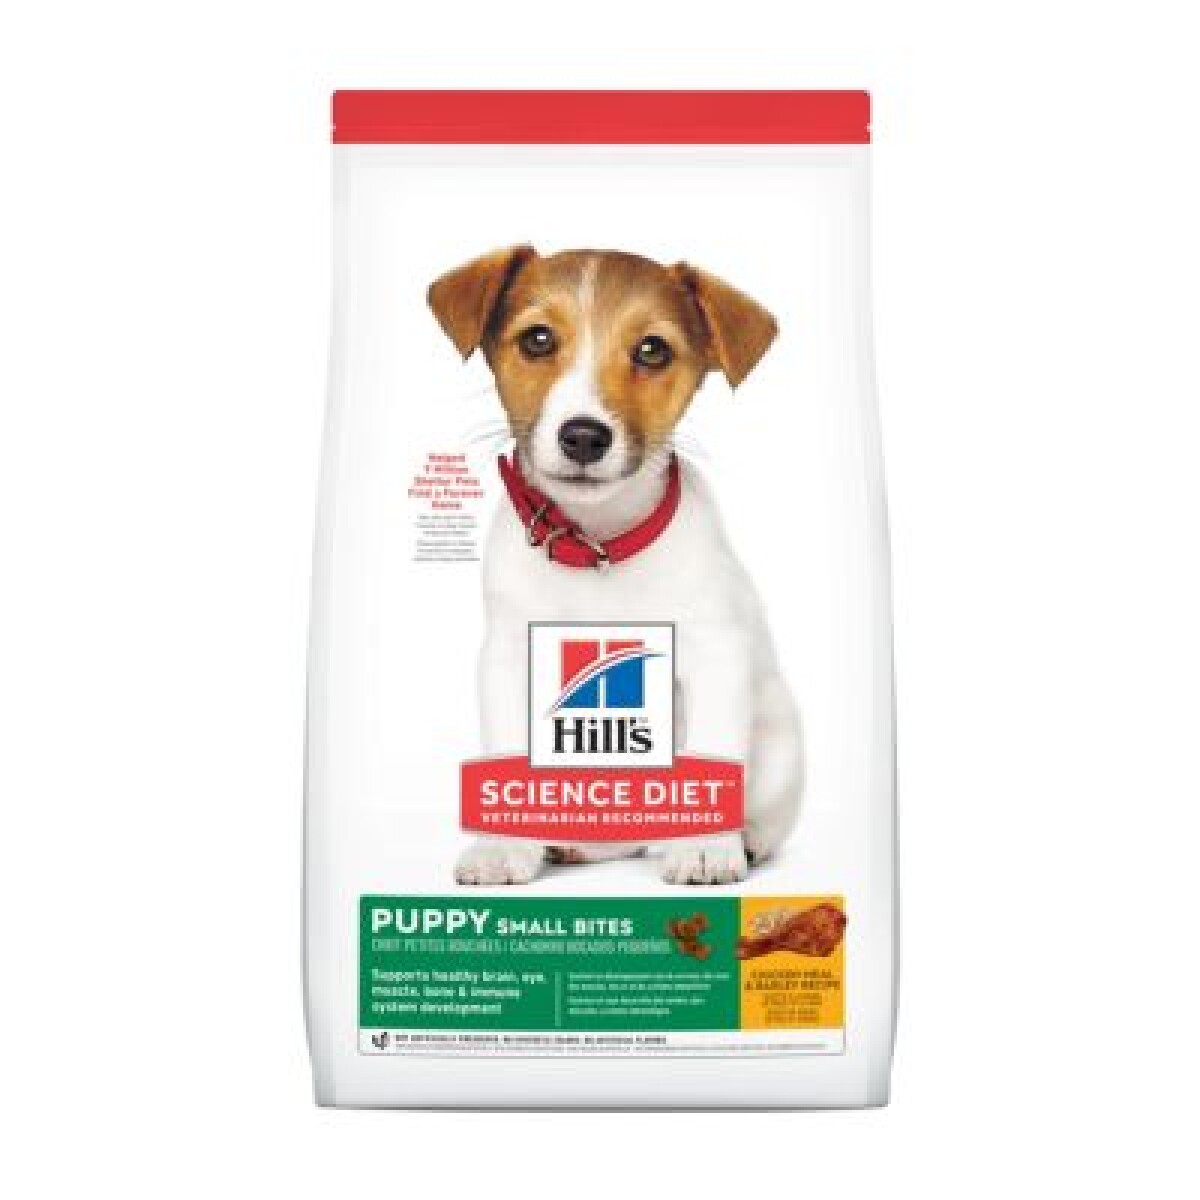 HILLS CANINE PUPPY SMALL BITES 2.04 KG - Unica 